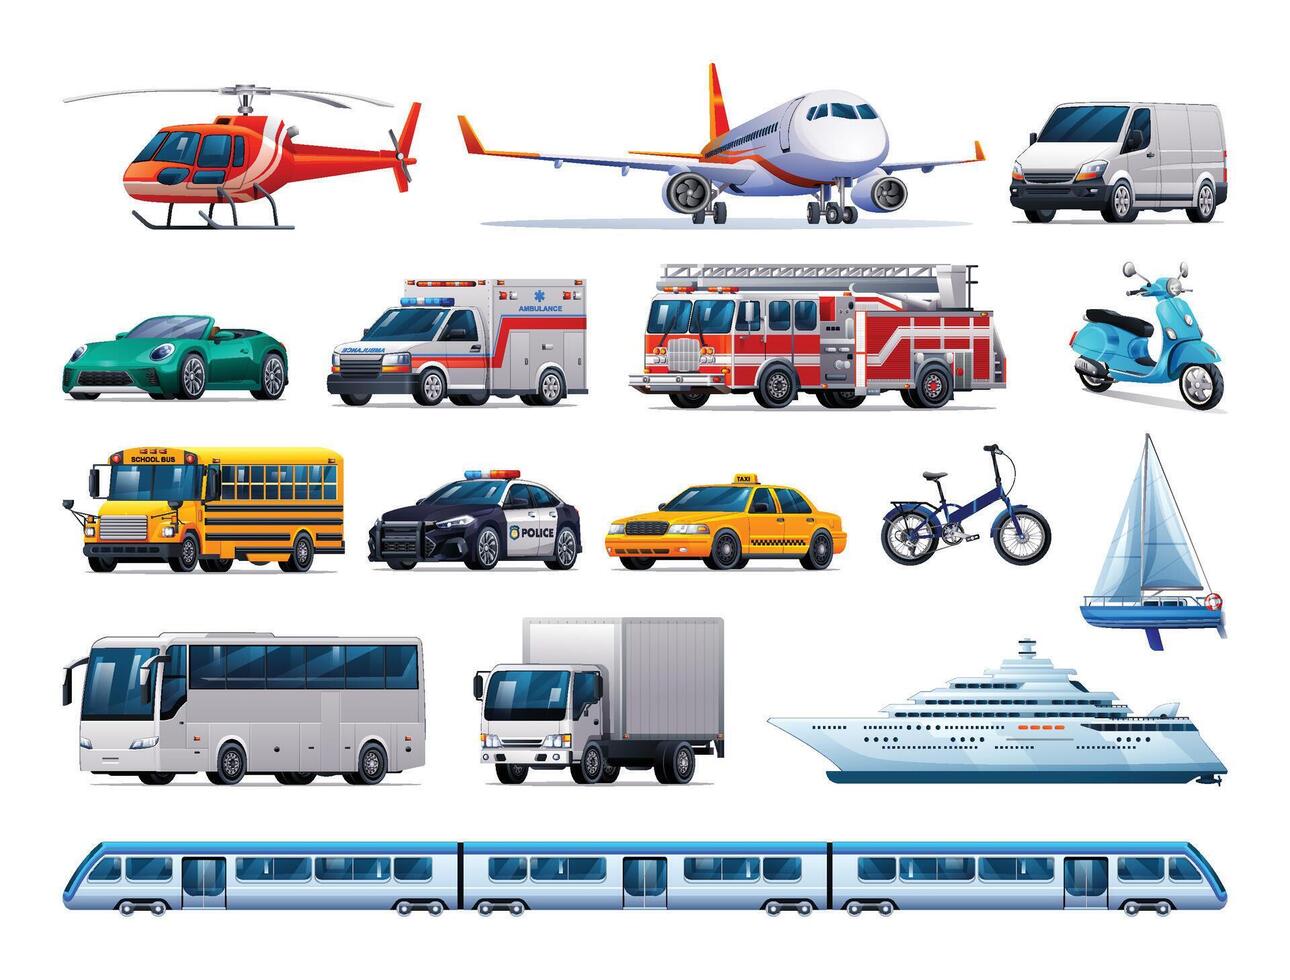 Set of vehicles. Collection of various kinds of transportation. Vector cartoon illustration